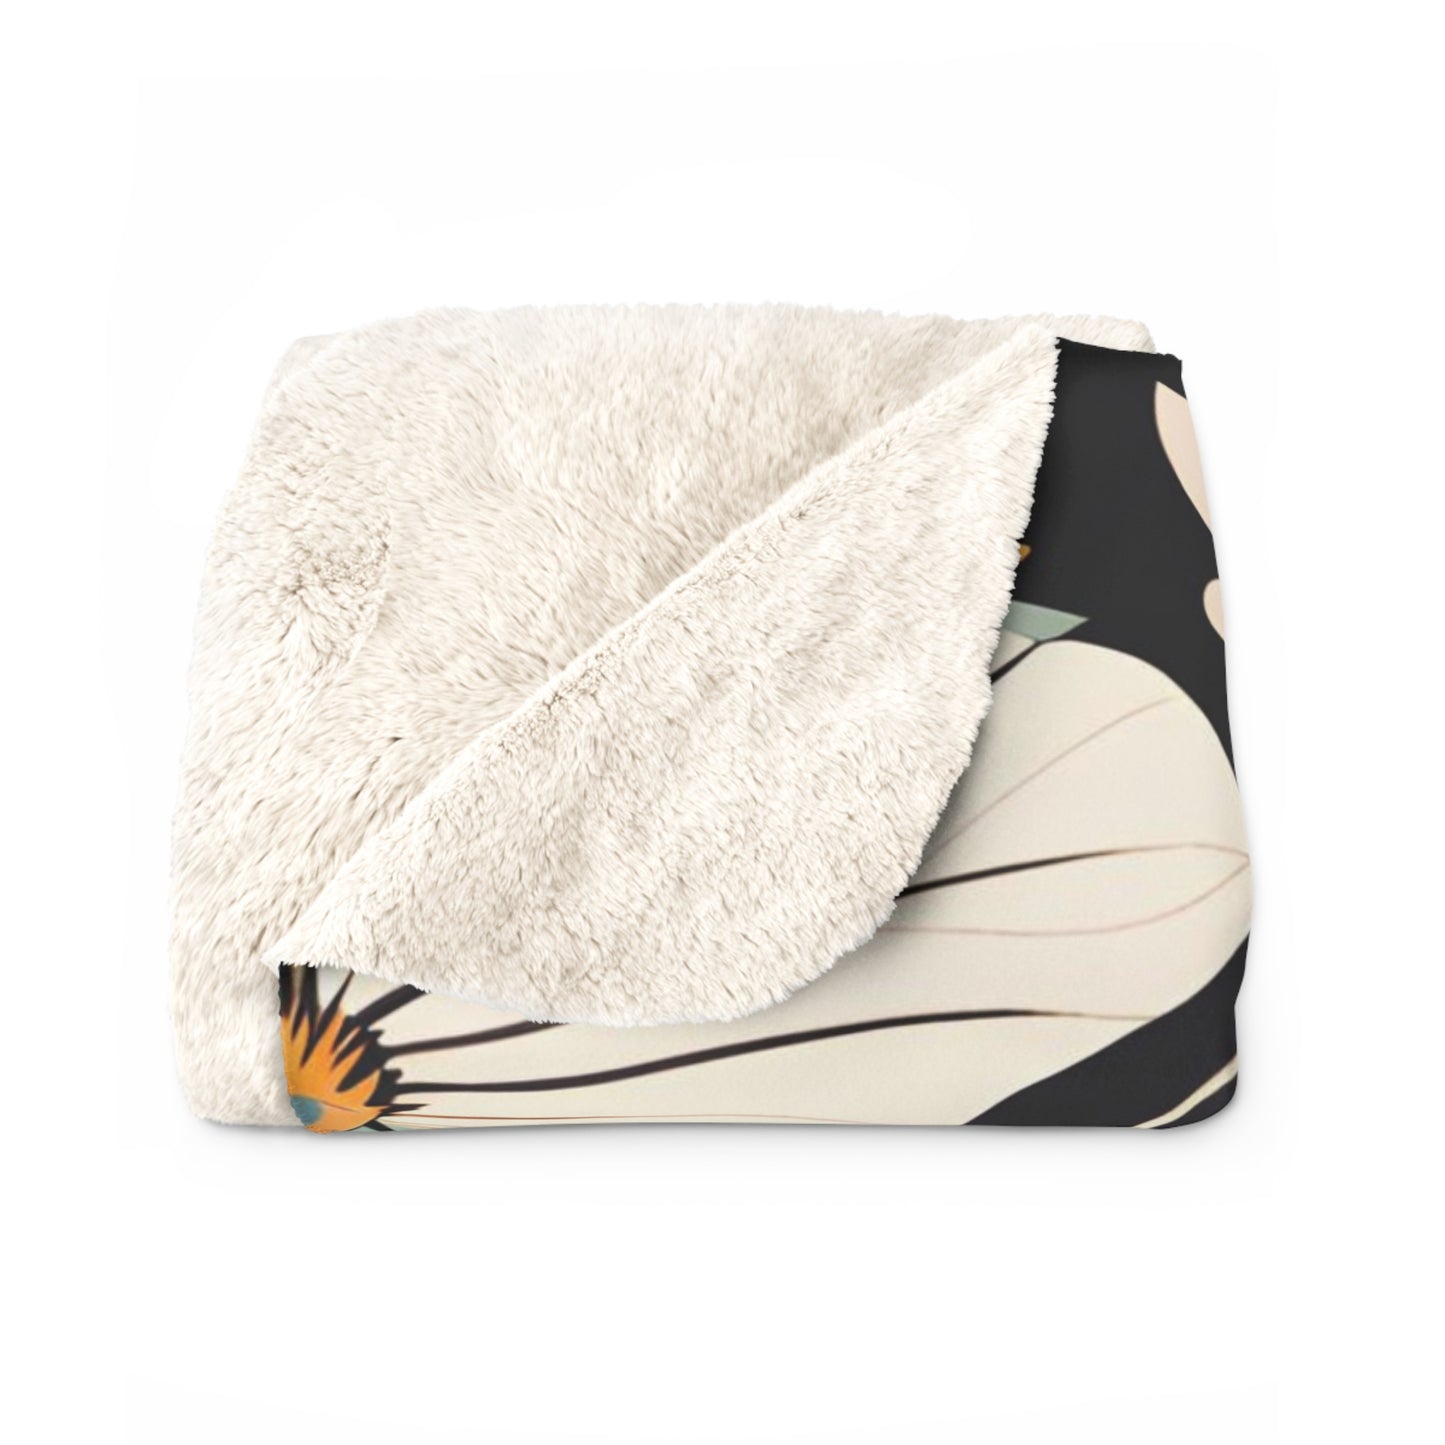 White Bird with Flowers, Sherpa Fleece Blanket for Cozy Warmth, 50"x60"